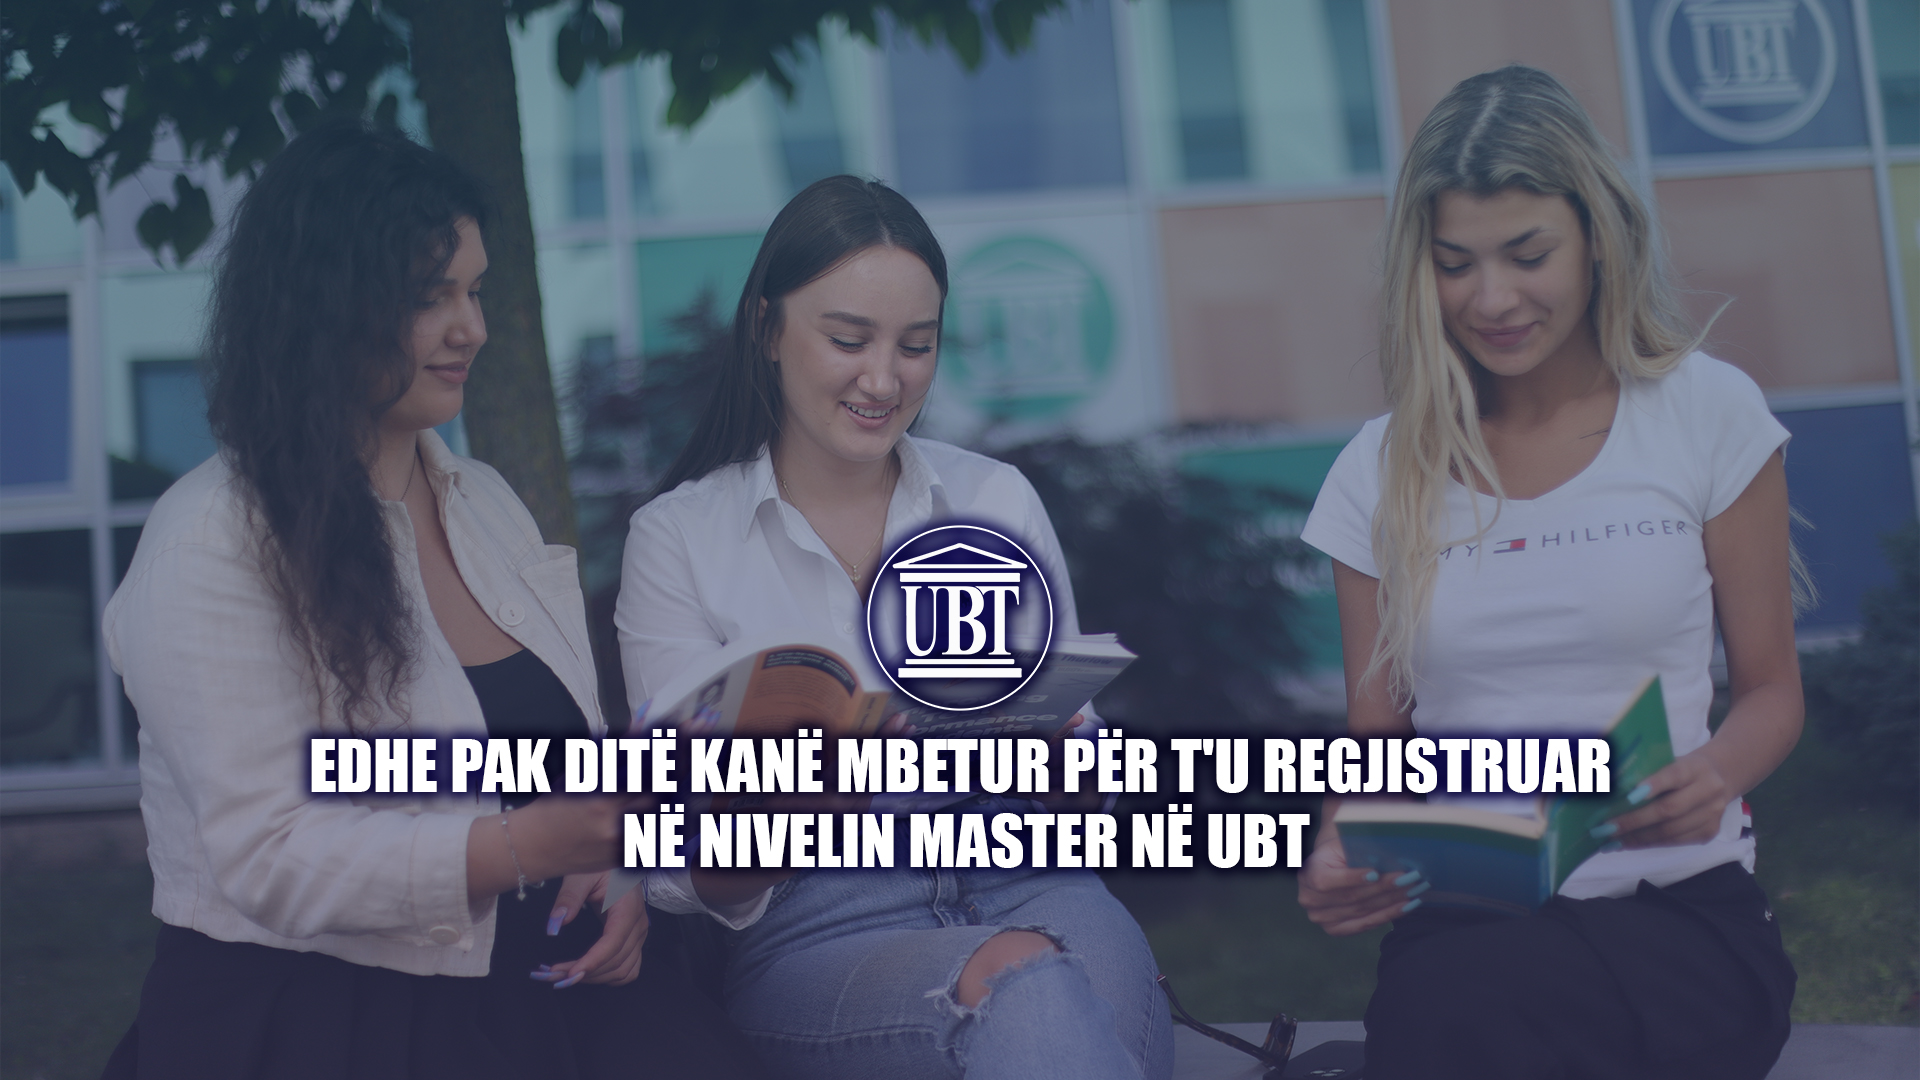 Just a few days left to become part of UBT at the master’s level